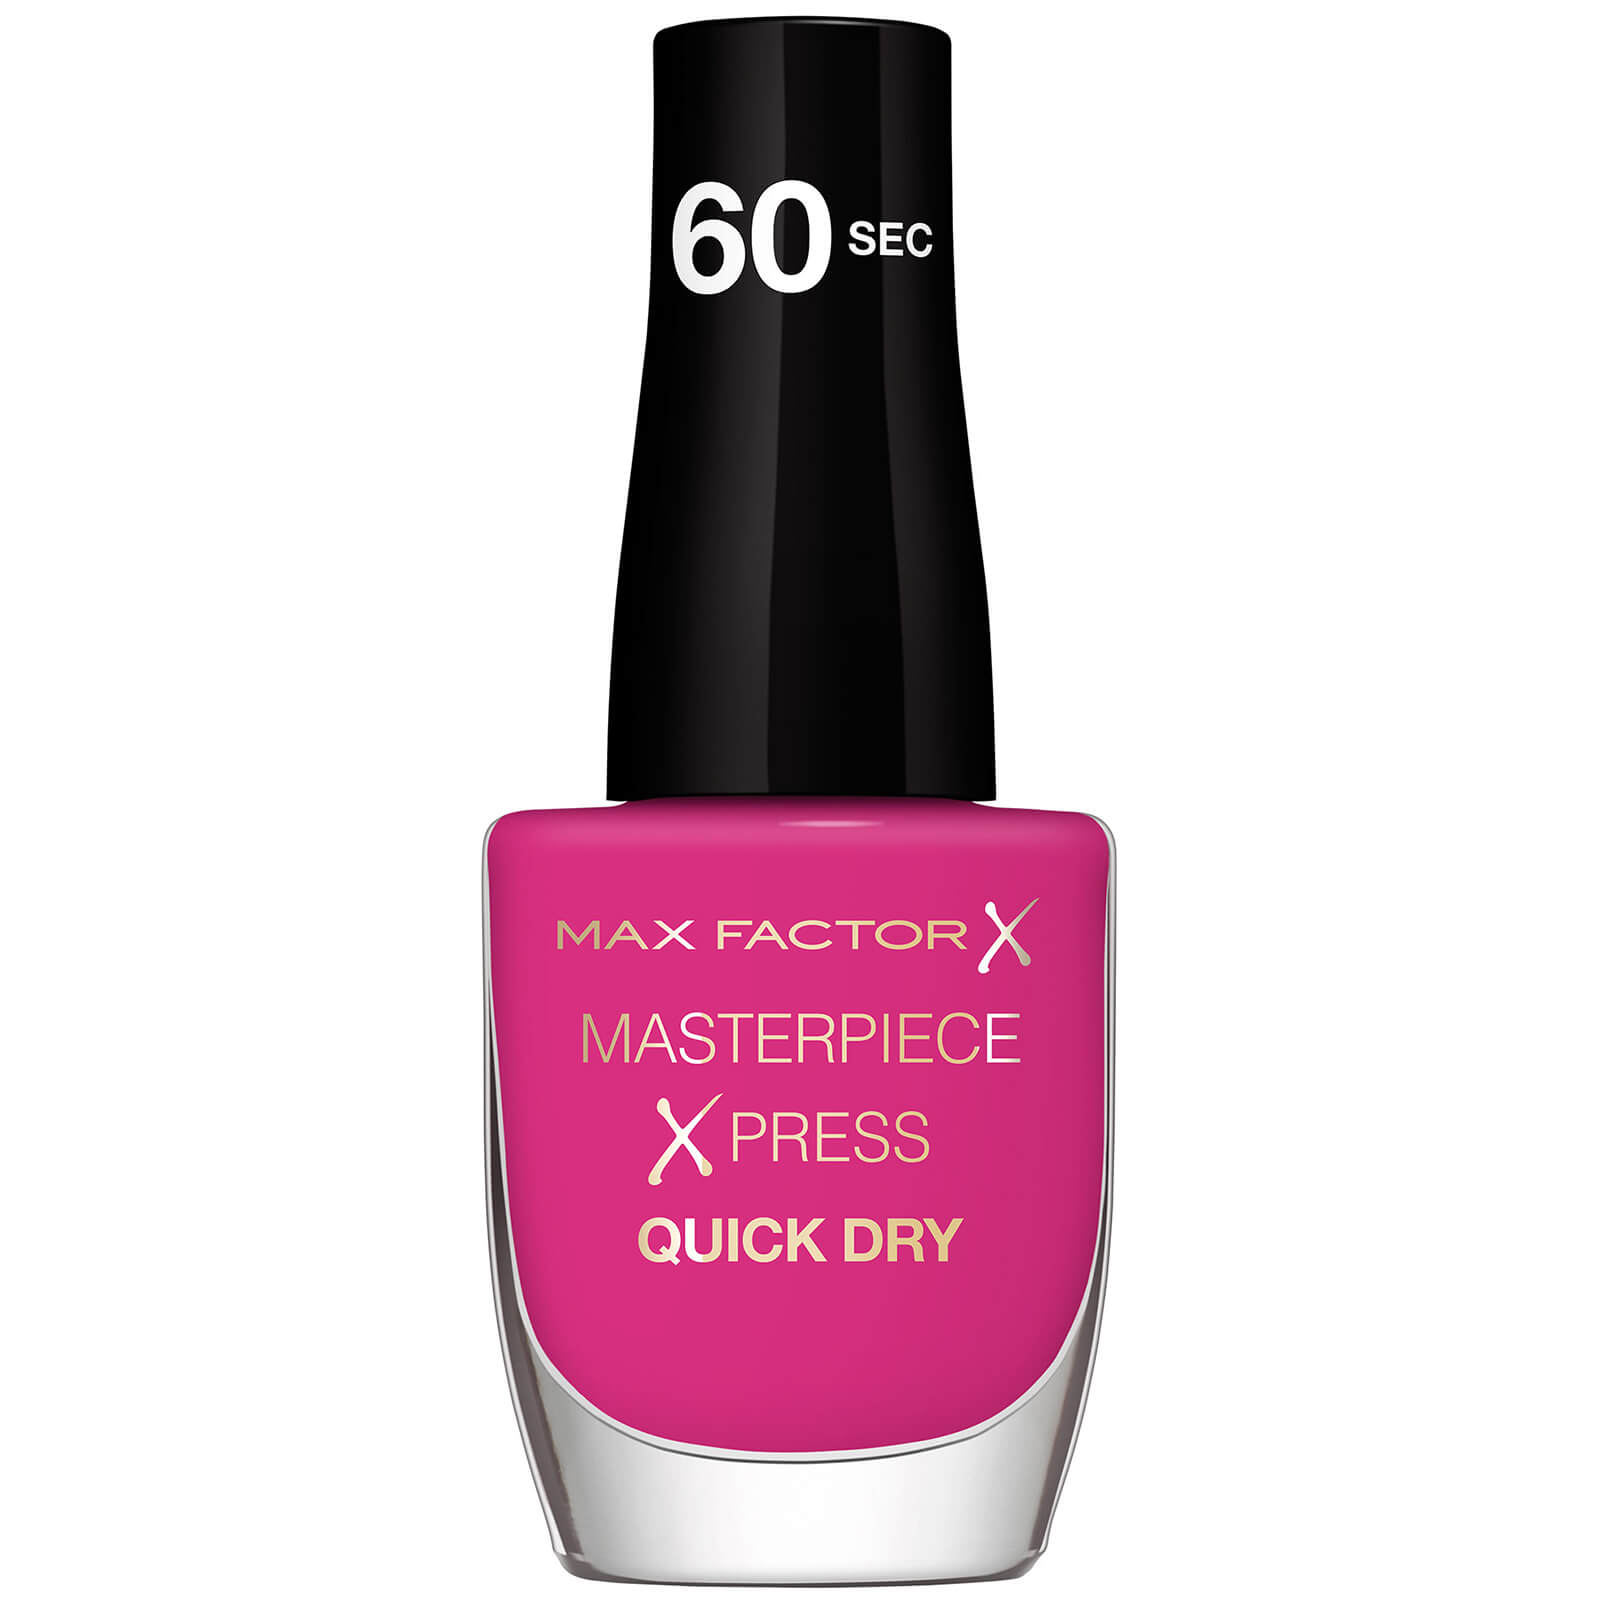 Max Factor Masterpiece X-Press Nail Polish 8ml (Various Shades) - I Believe in Pink 271